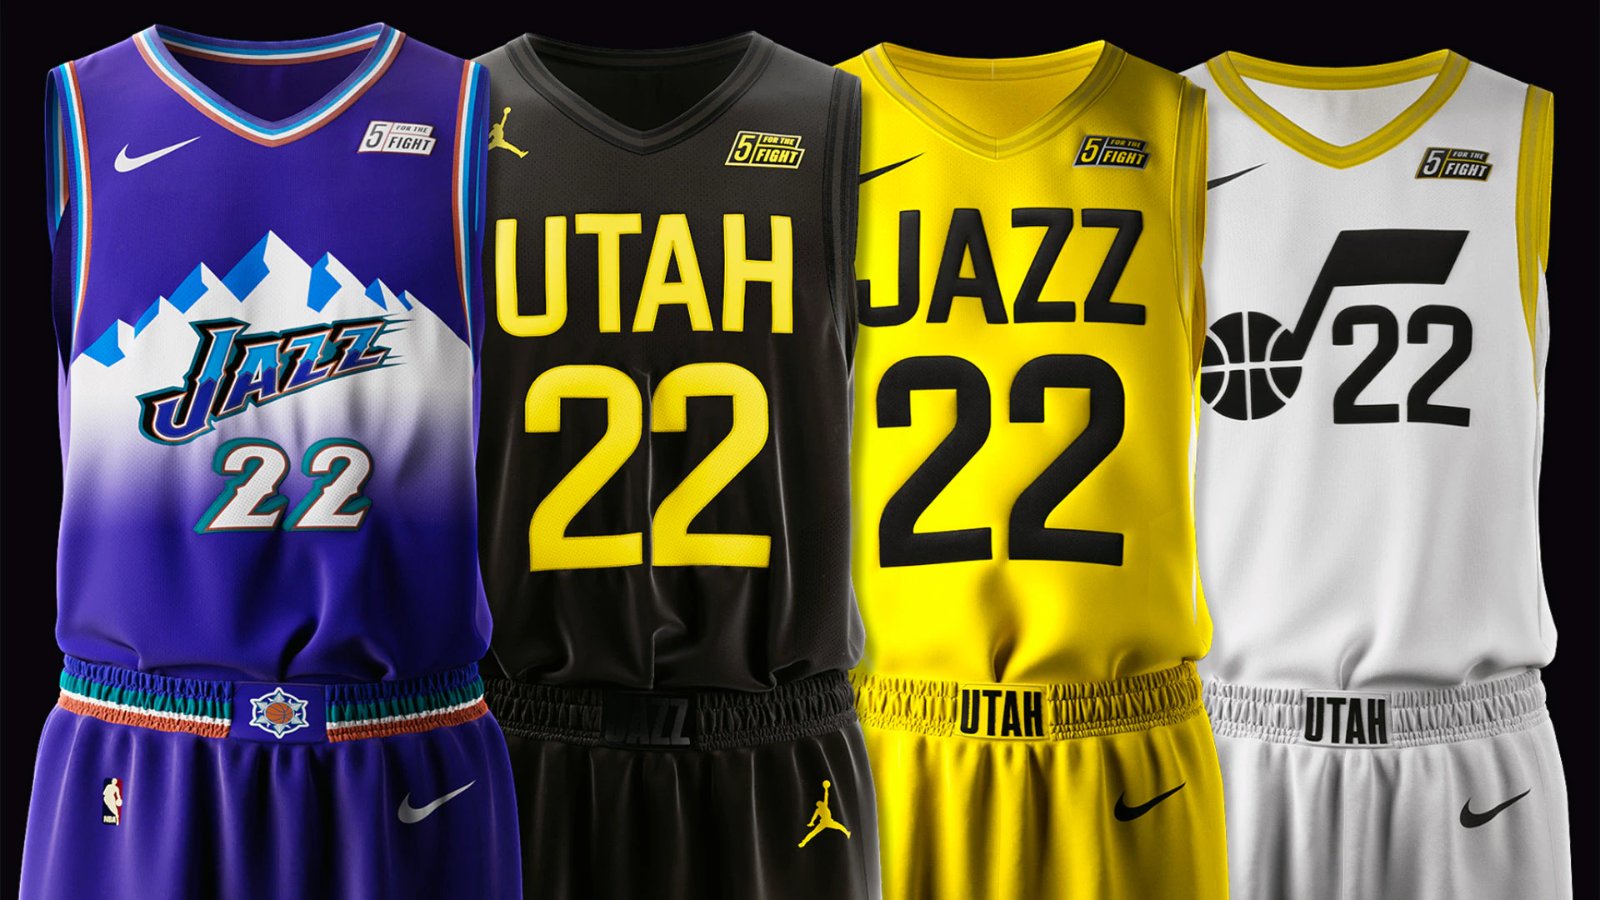 Worst Rated in NBA: Utah Jazz Already Considering New Jerseys After 5 Months